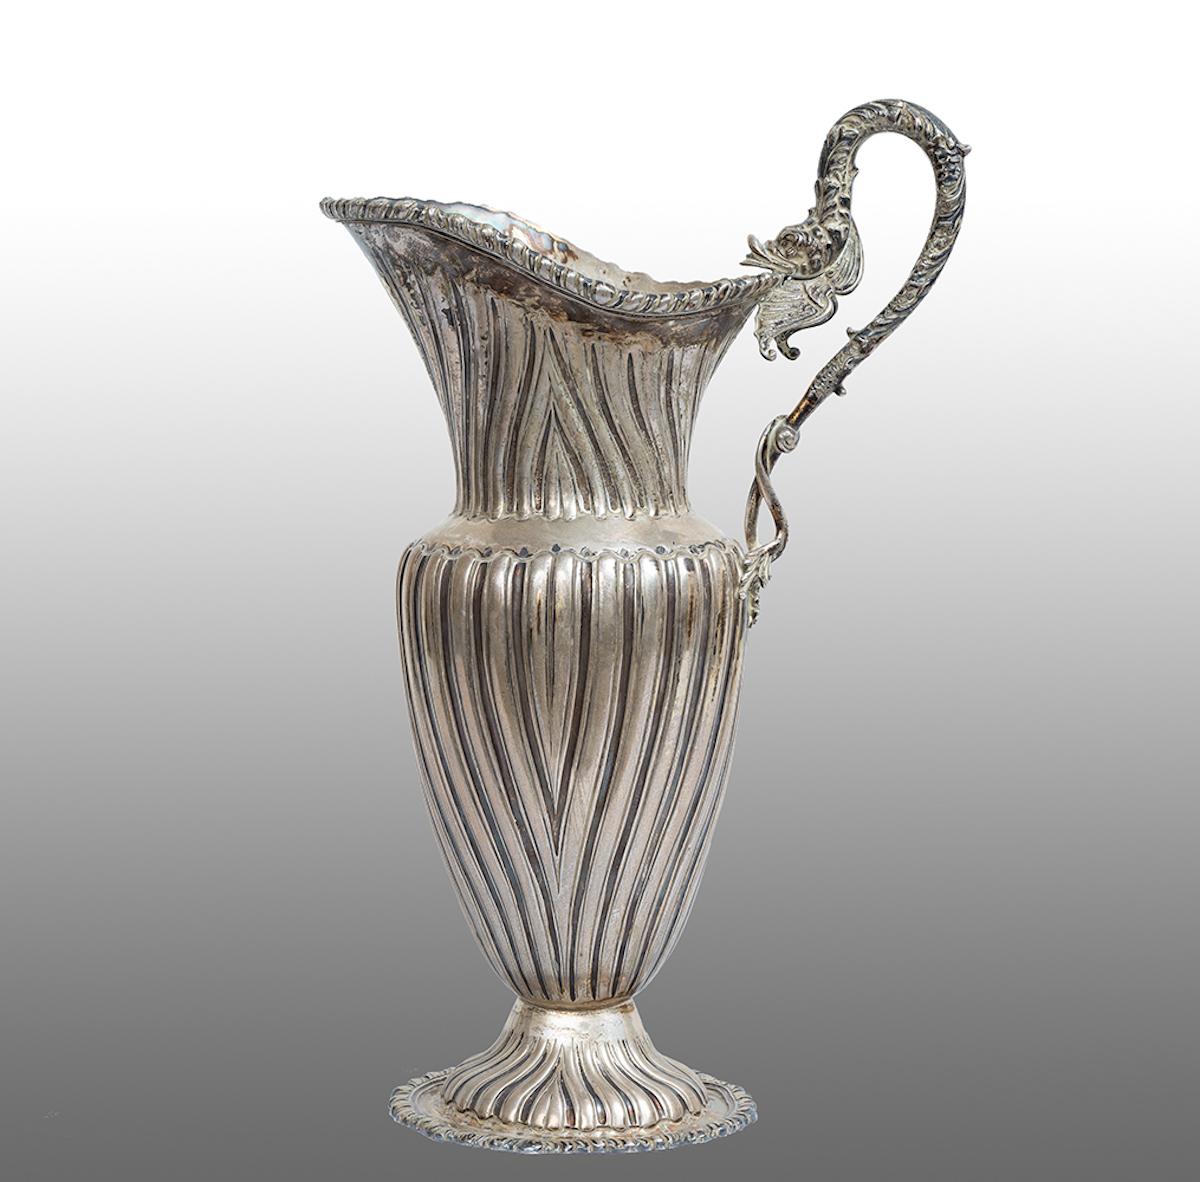 Unknown Figurative Sculpture - Antique Neapolitan silver pourer belonging to the early 20th century.